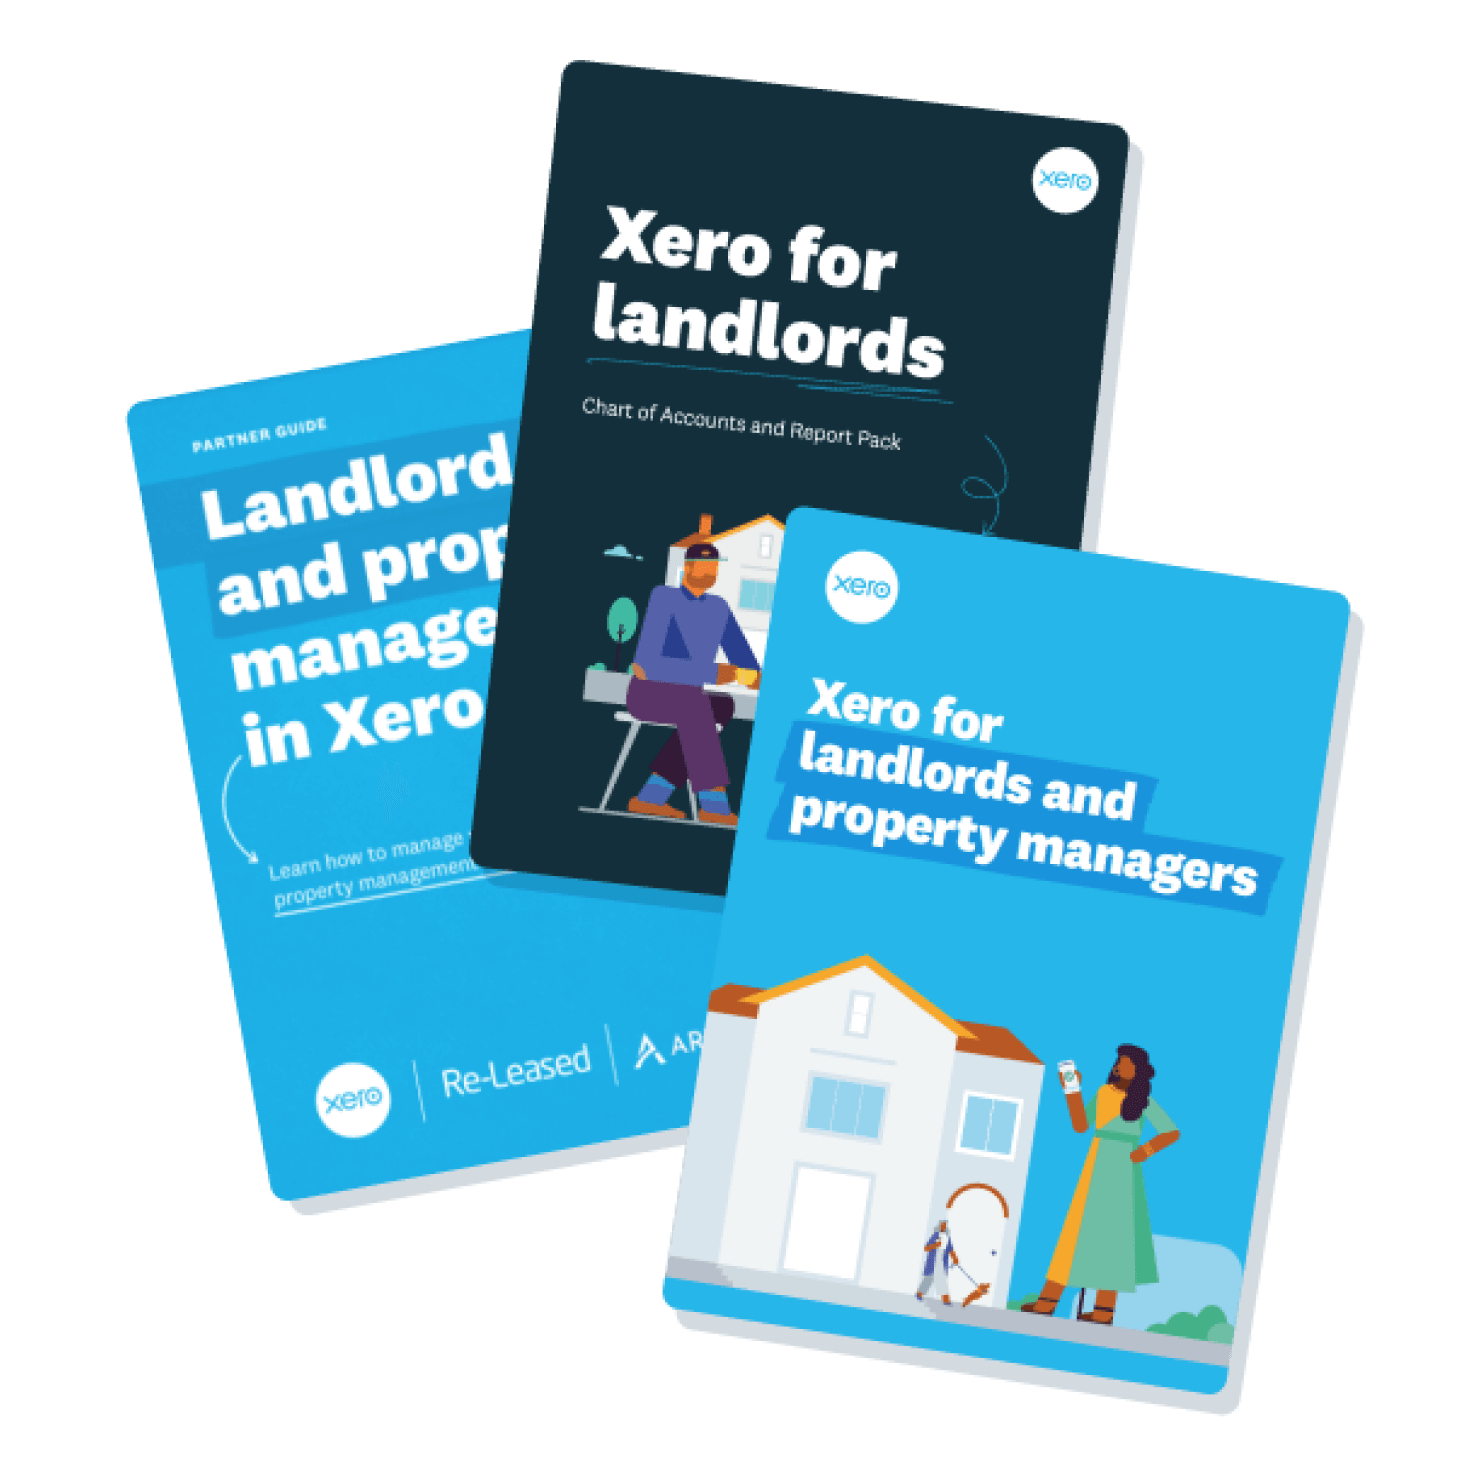 The Xero for landlords resource pack including a chart of accounts and property playbook.